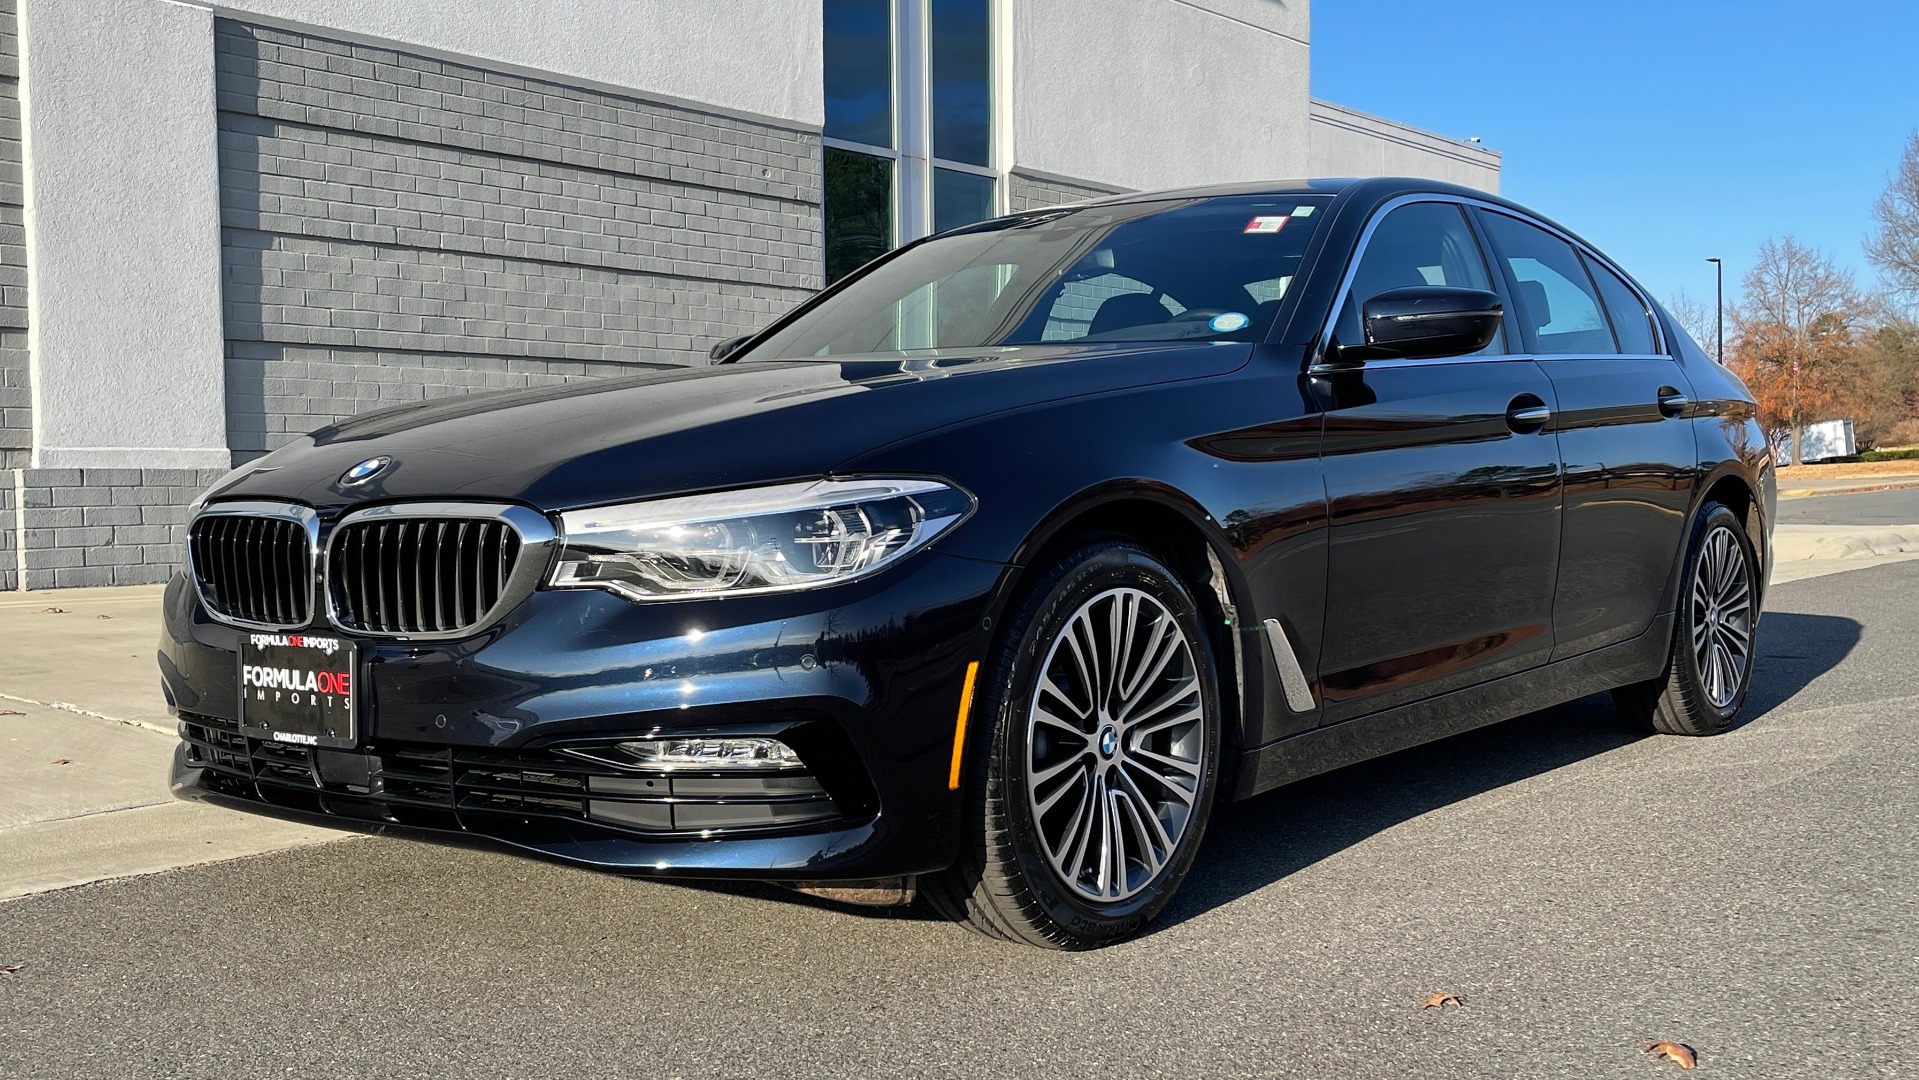 Used 2018 BMW 5 SERIES 530I XDRIVE PREMIUM / EXEC PKG / DRVR ASST PLUS / NAV / REARVIEW for sale Sold at Formula Imports in Charlotte NC 28227 2